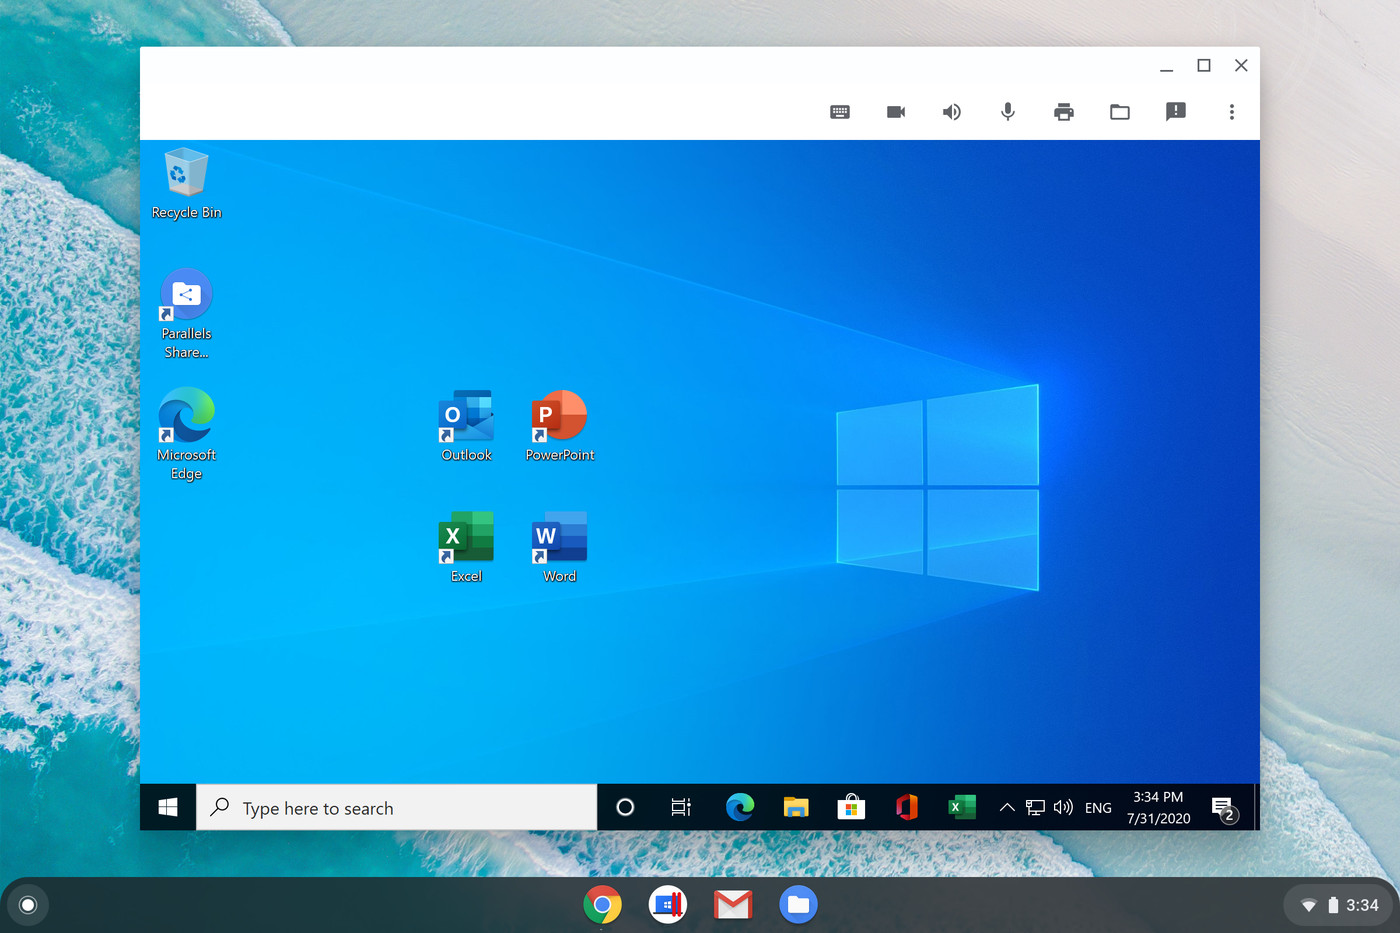 Windows apps now run on Chromebooks with Parallels Desktop - The Verge